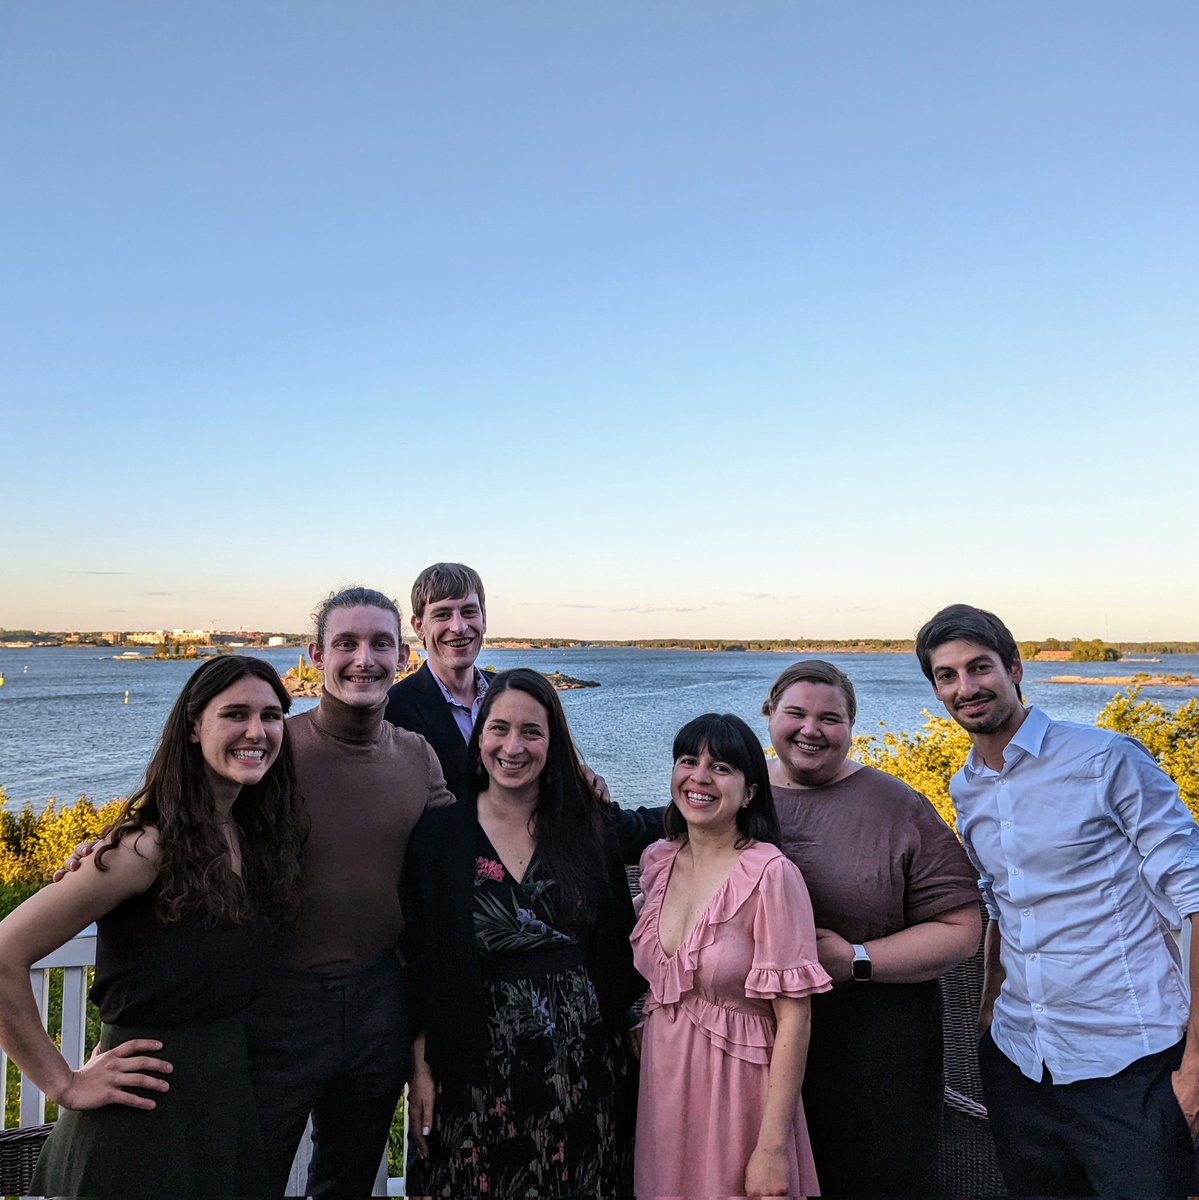 Group photos at #tappinano2022 @TAPPINanoStdnts - conference dinner was a blast + the view was stunning & a great lunch in an old Helsinki prison with good friend Tekla Tammelin from @VTTFinland with @DrMarcusJohns @Ferreira_ElisaS @fdacierno @megangrobertss https://t.co/BVWXq5MqiM